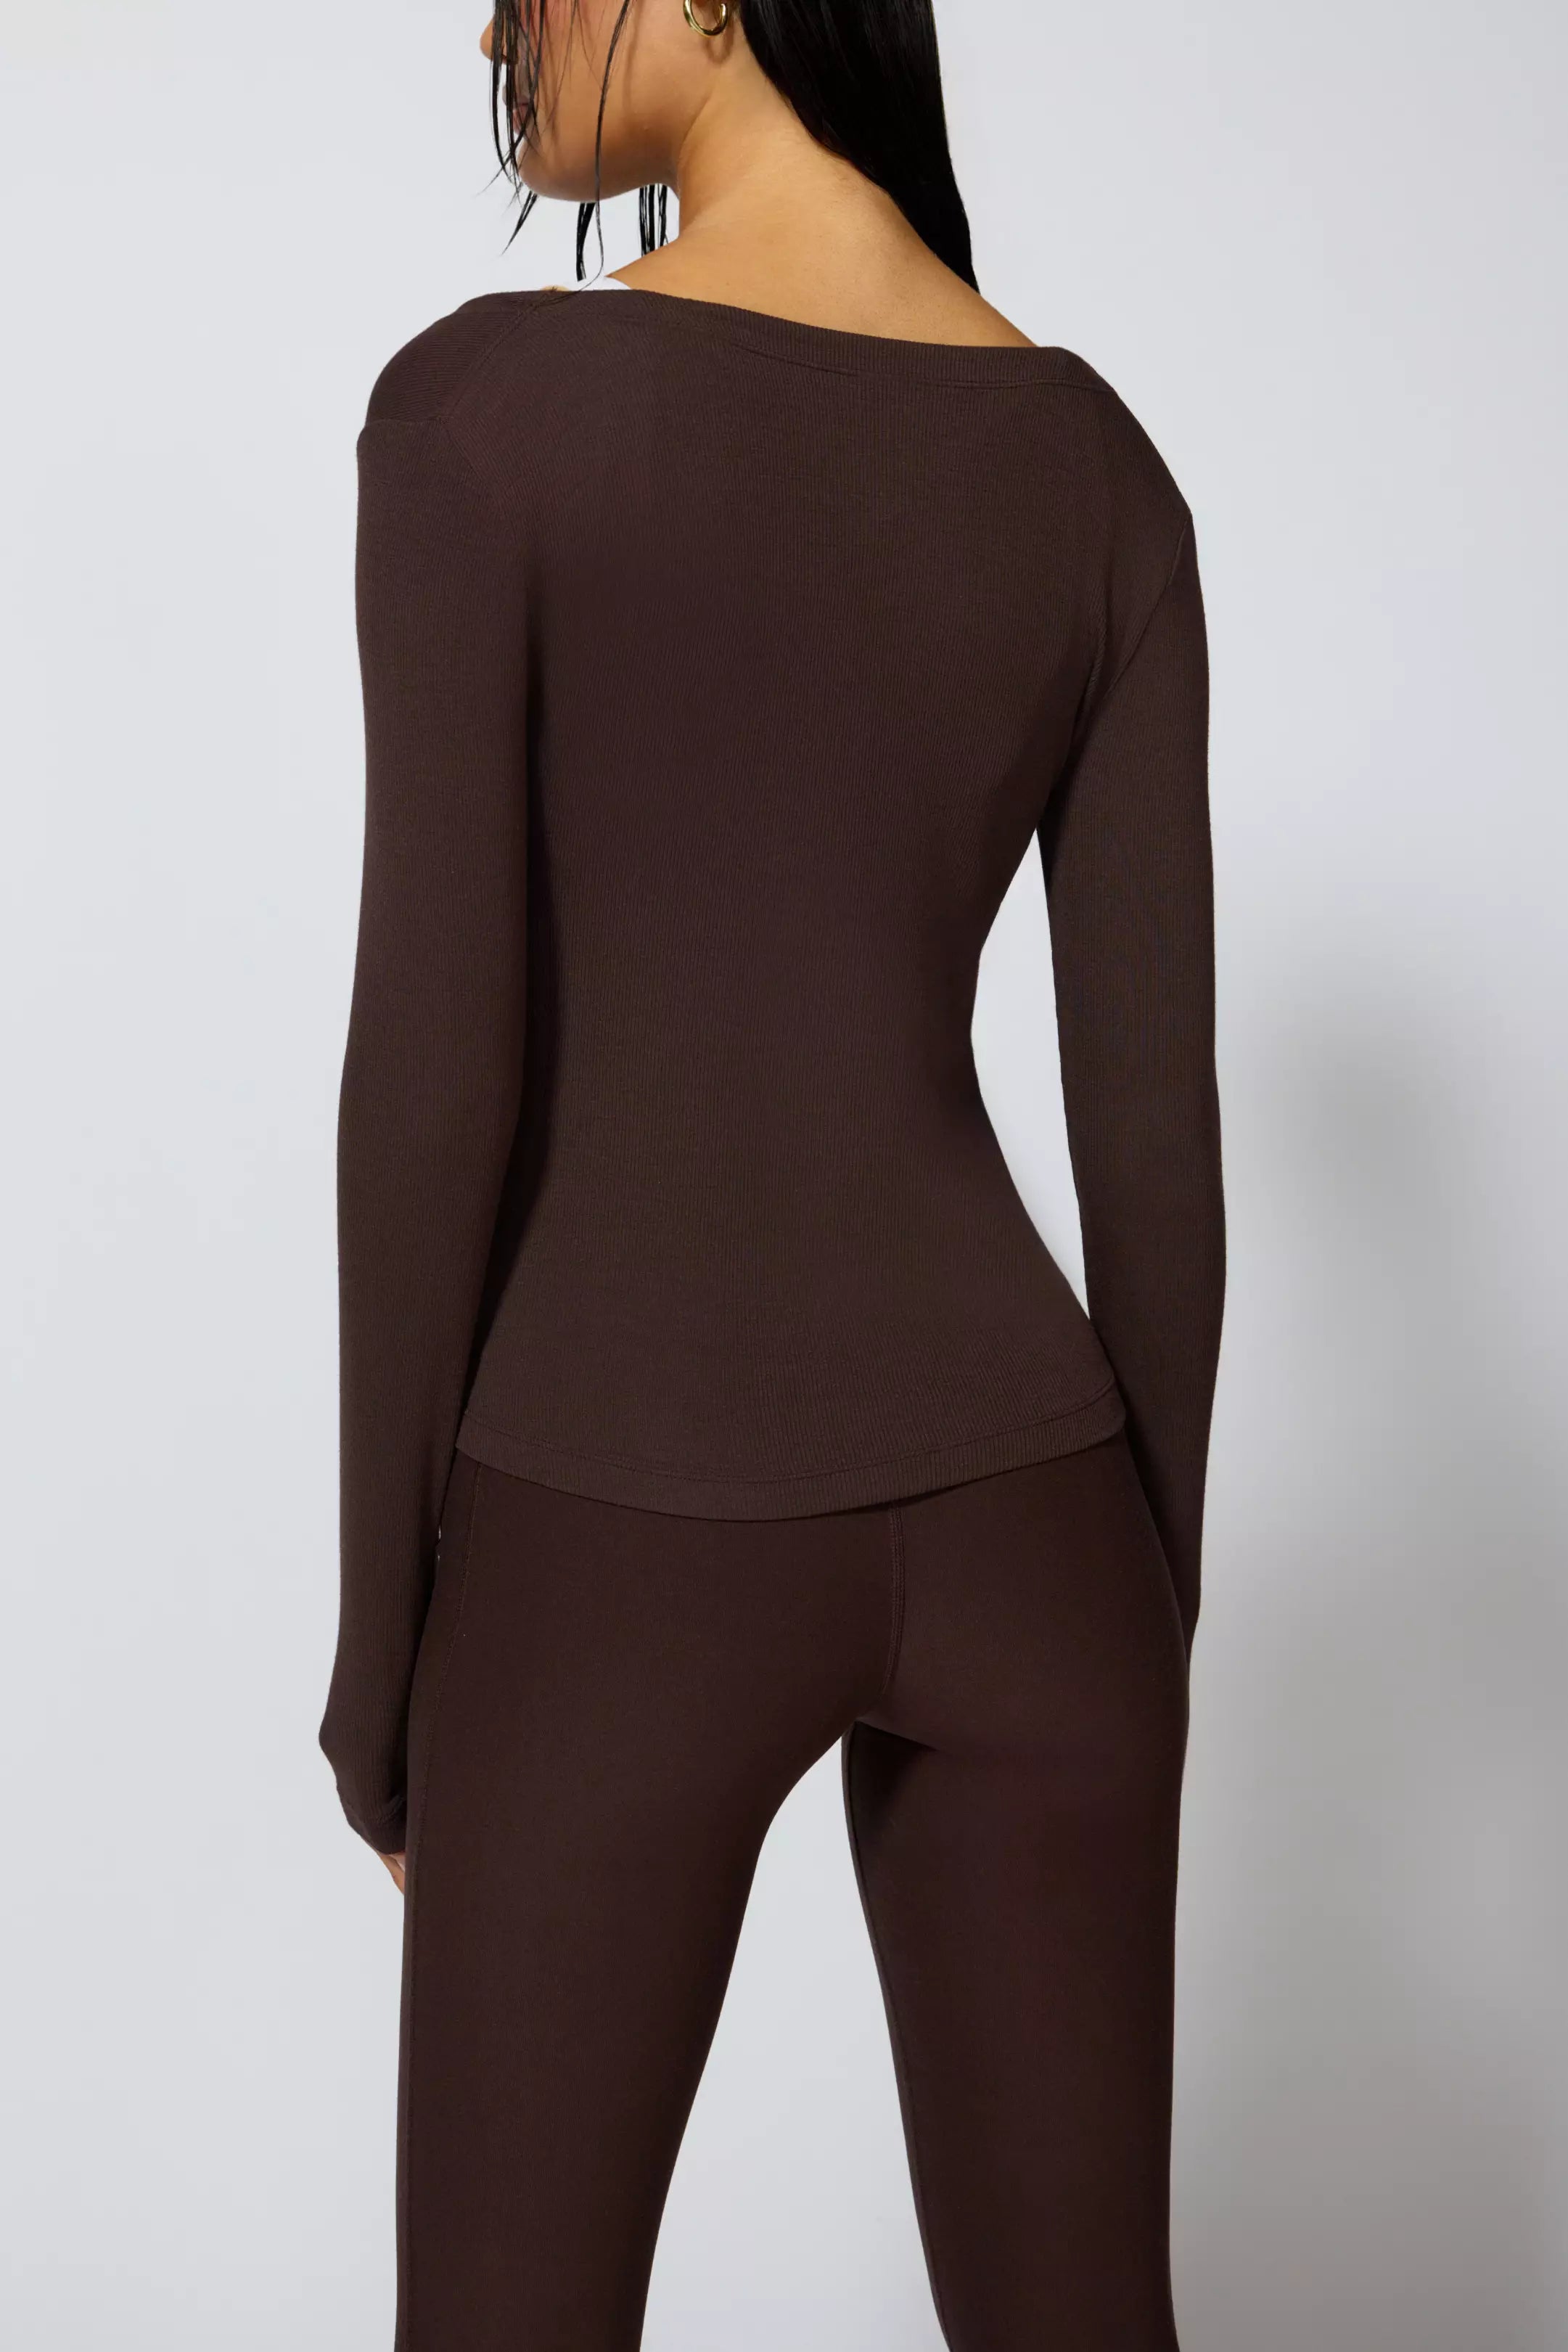 Composure Square-Neck Slim Fit Long Sleeve Top